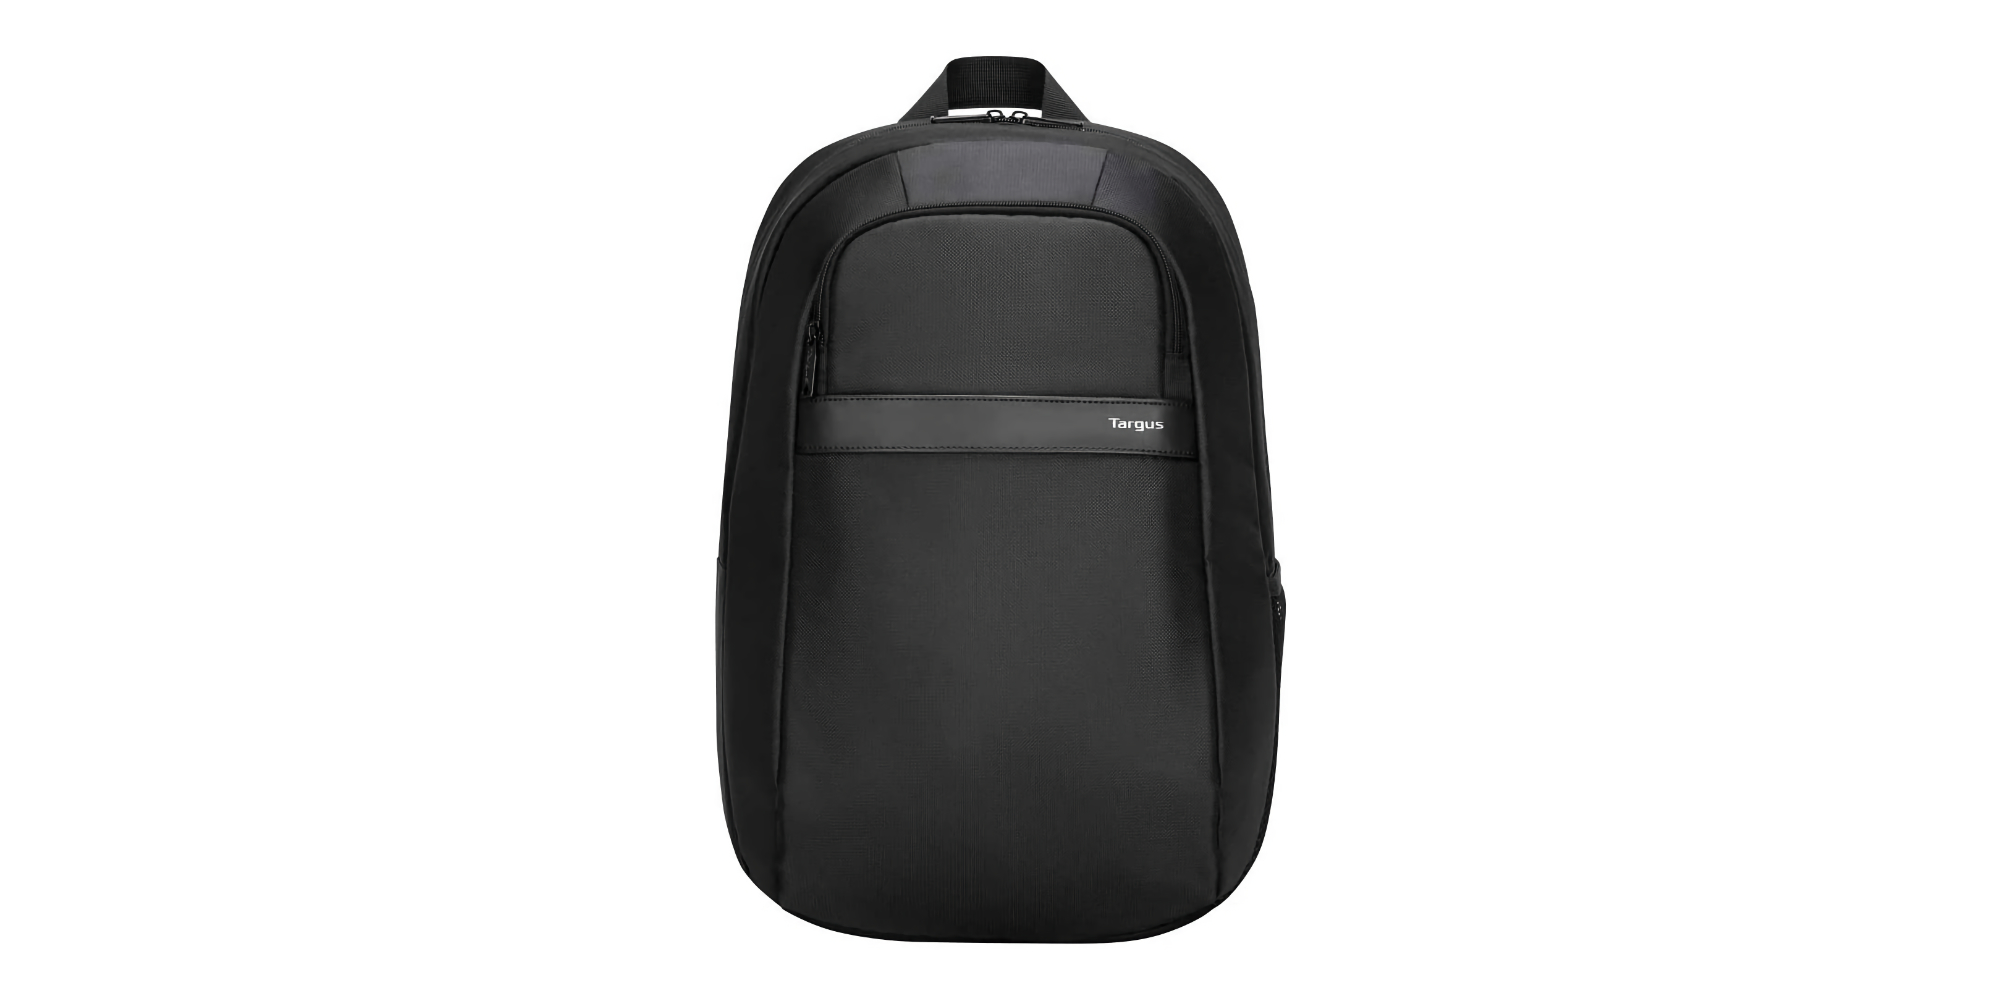 Targus MacBook backpack sale kicks off from $14.50 (Up to 51% off)